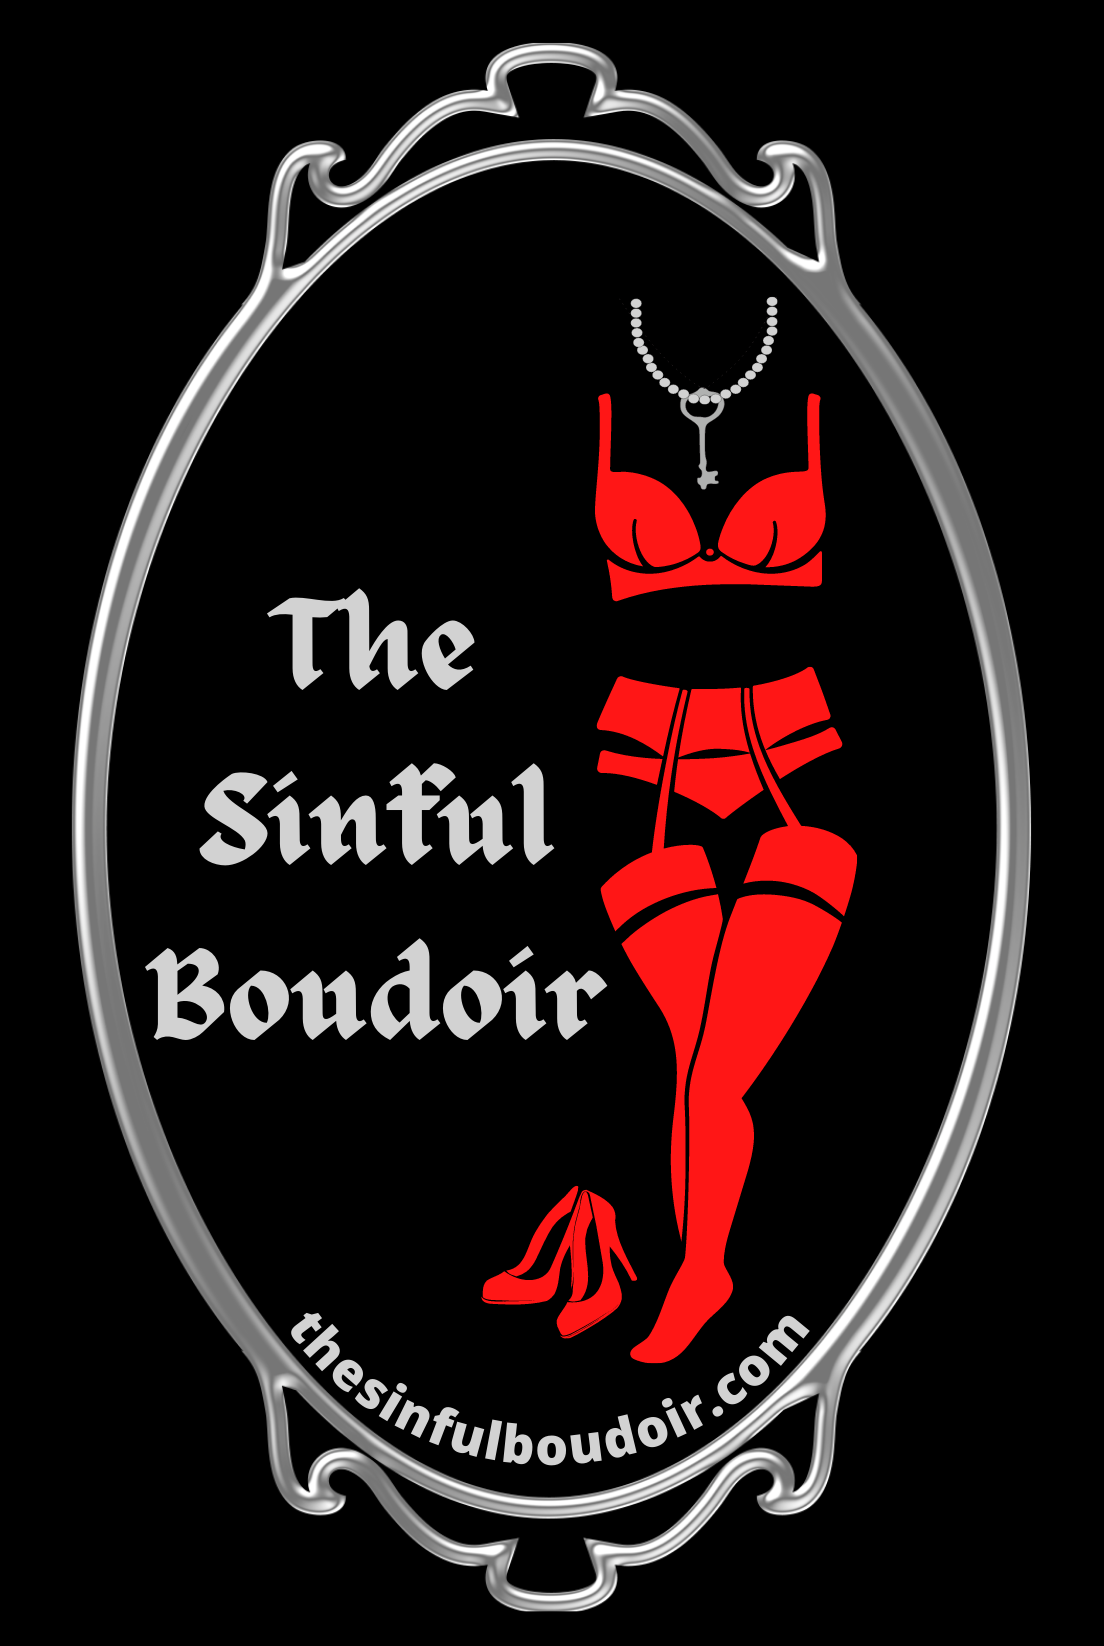 Roscoe's Chili Challenge welcomes The Sinful Boudoir